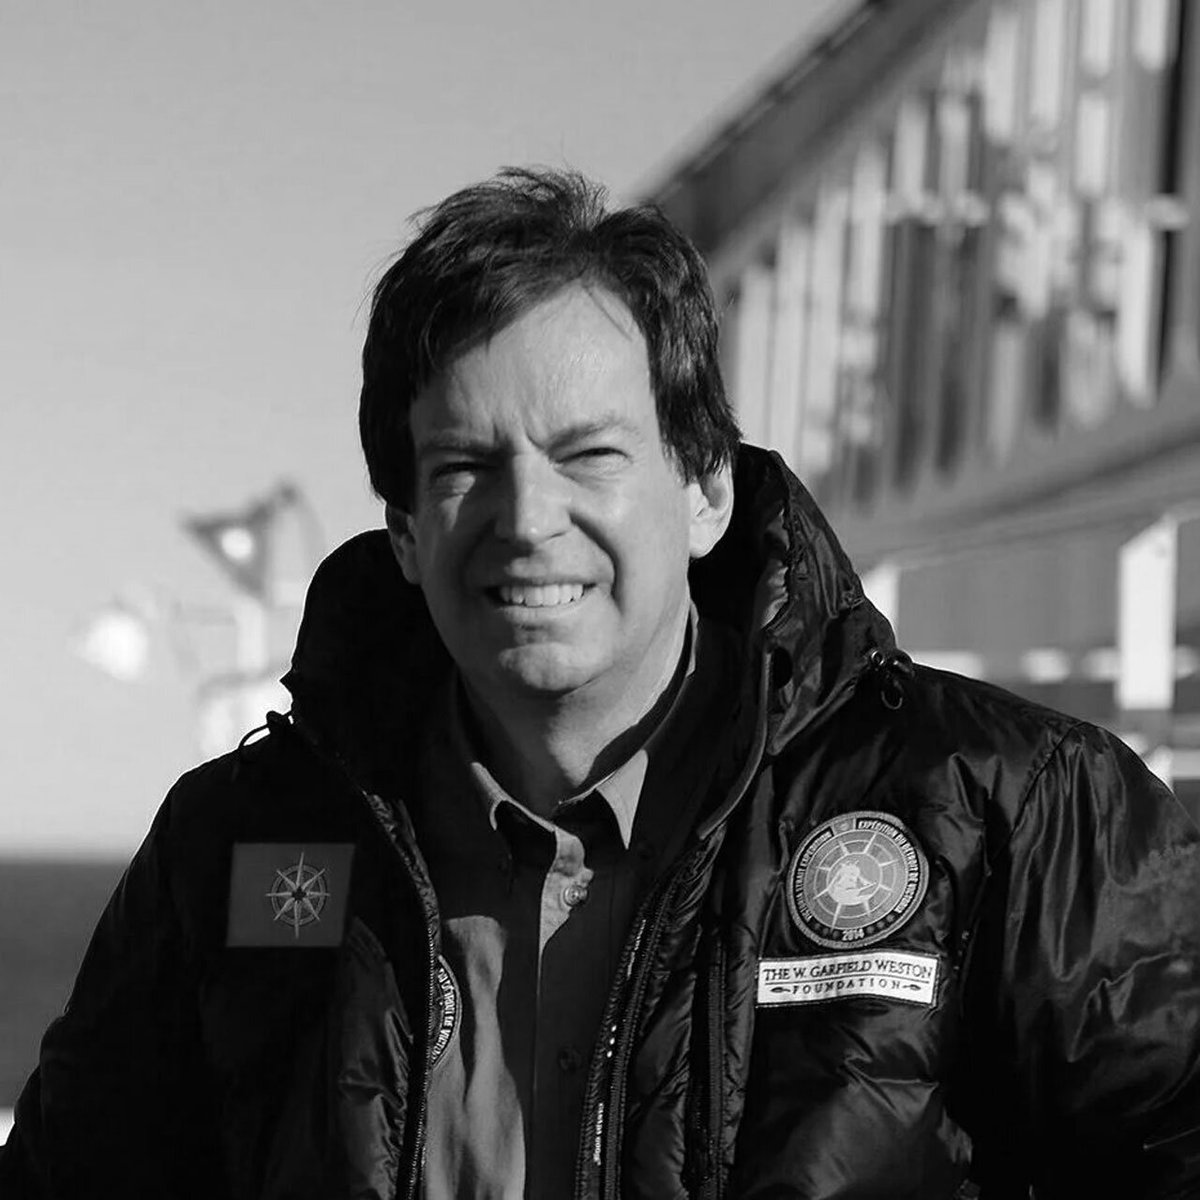 Chief Executive of the @RCGS_SGRC and the internationally bestselling author, @JohnGGeiger joins the judging panel for the Shackleton Medal for 2024. In our latest journal he talks to @hallibee1: bit.ly/3IkjA5y #Shackleton #LiveCourageously